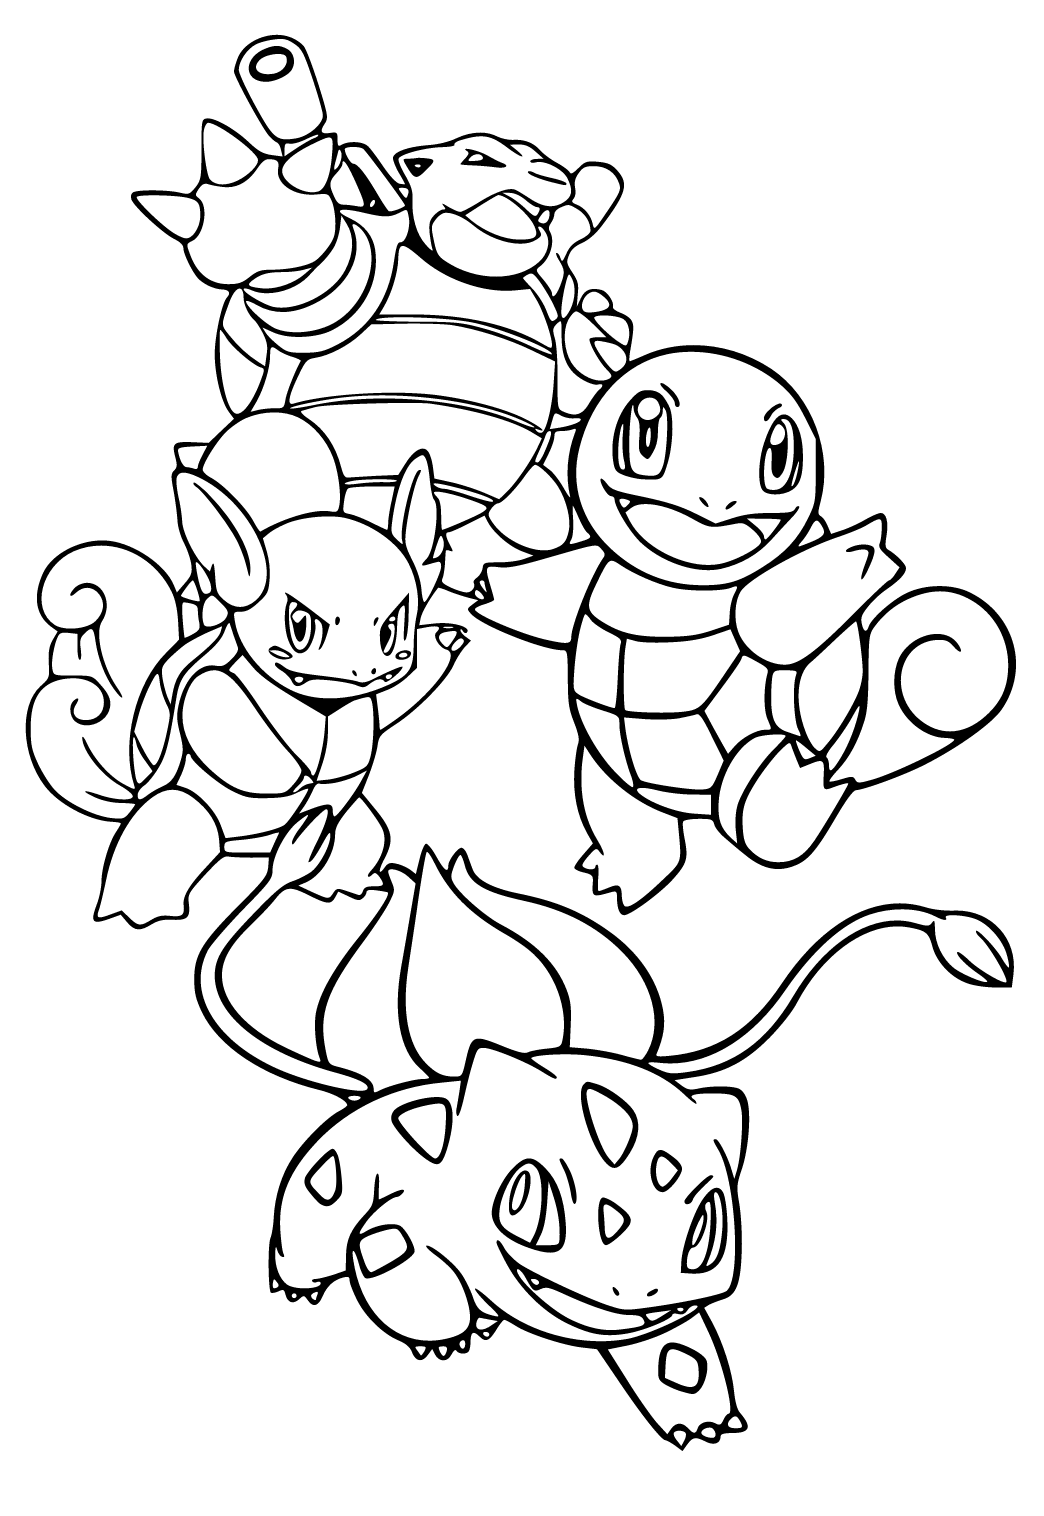 Free printable squirtle characters coloring page for adults and kids